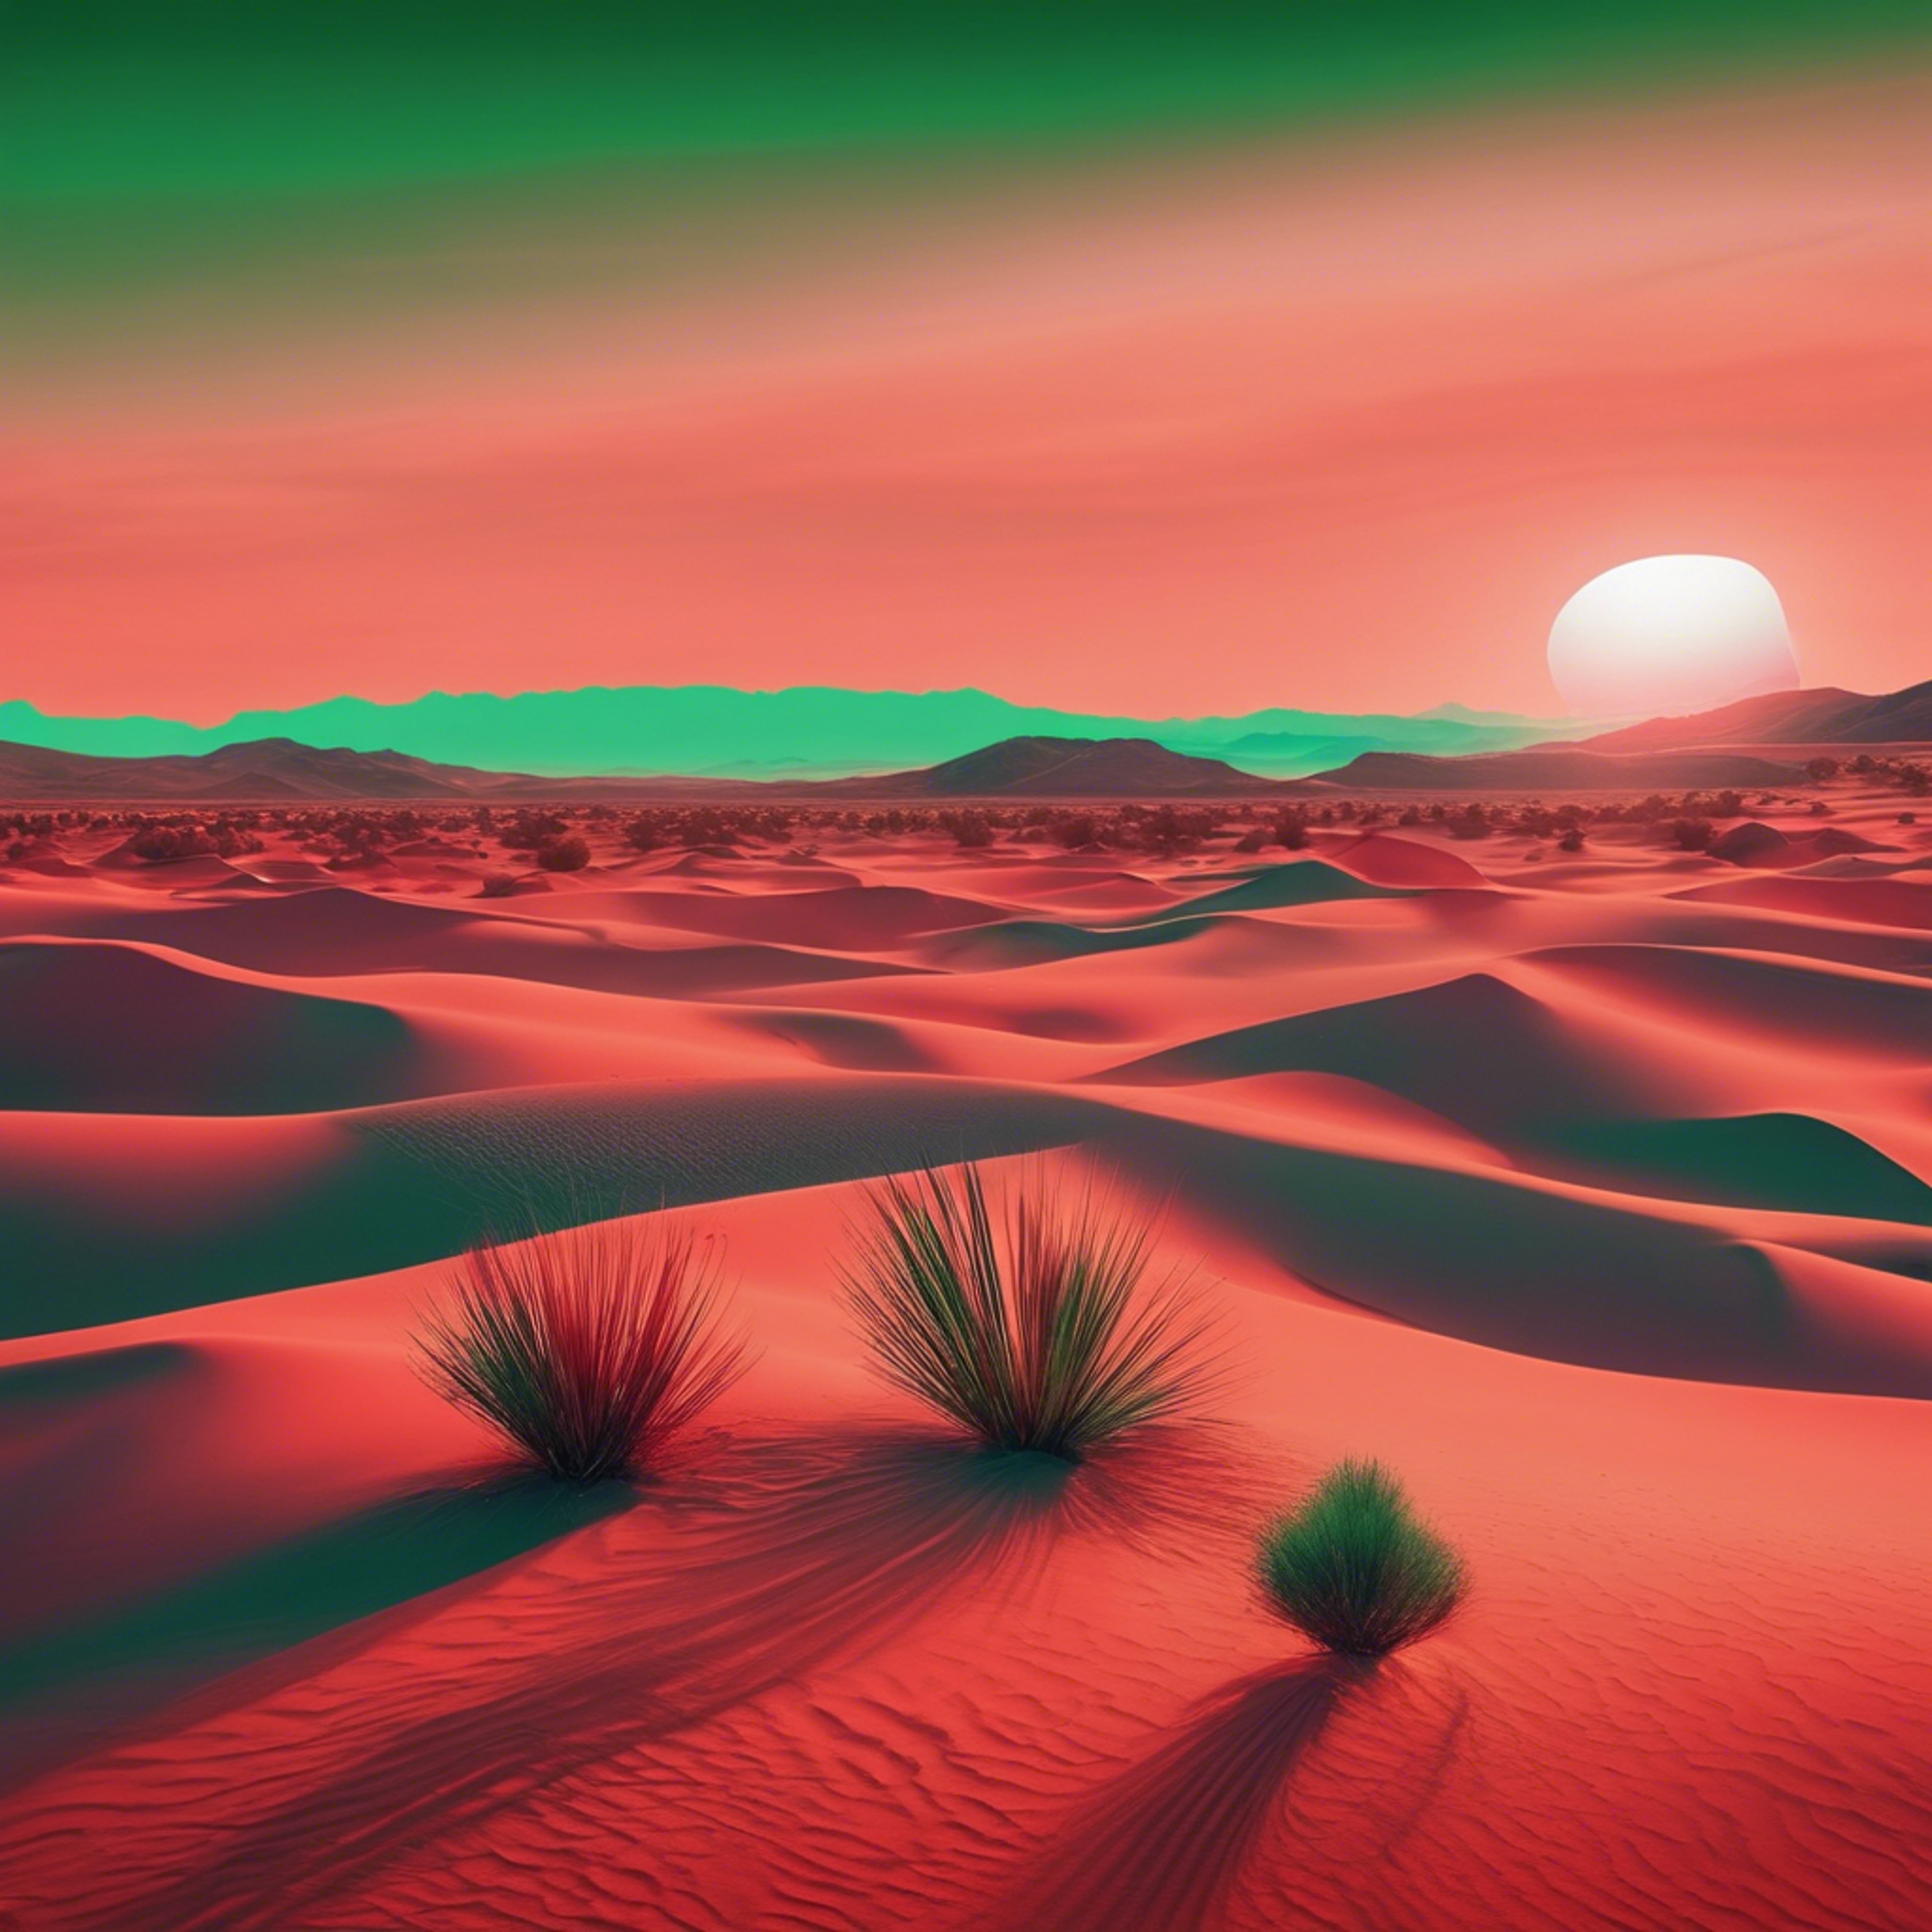 Abstract mirage in red and green, reminiscent of a modern artist's take on a desert sunset Papel de parede[3a4ec3a043b54638a7ad]